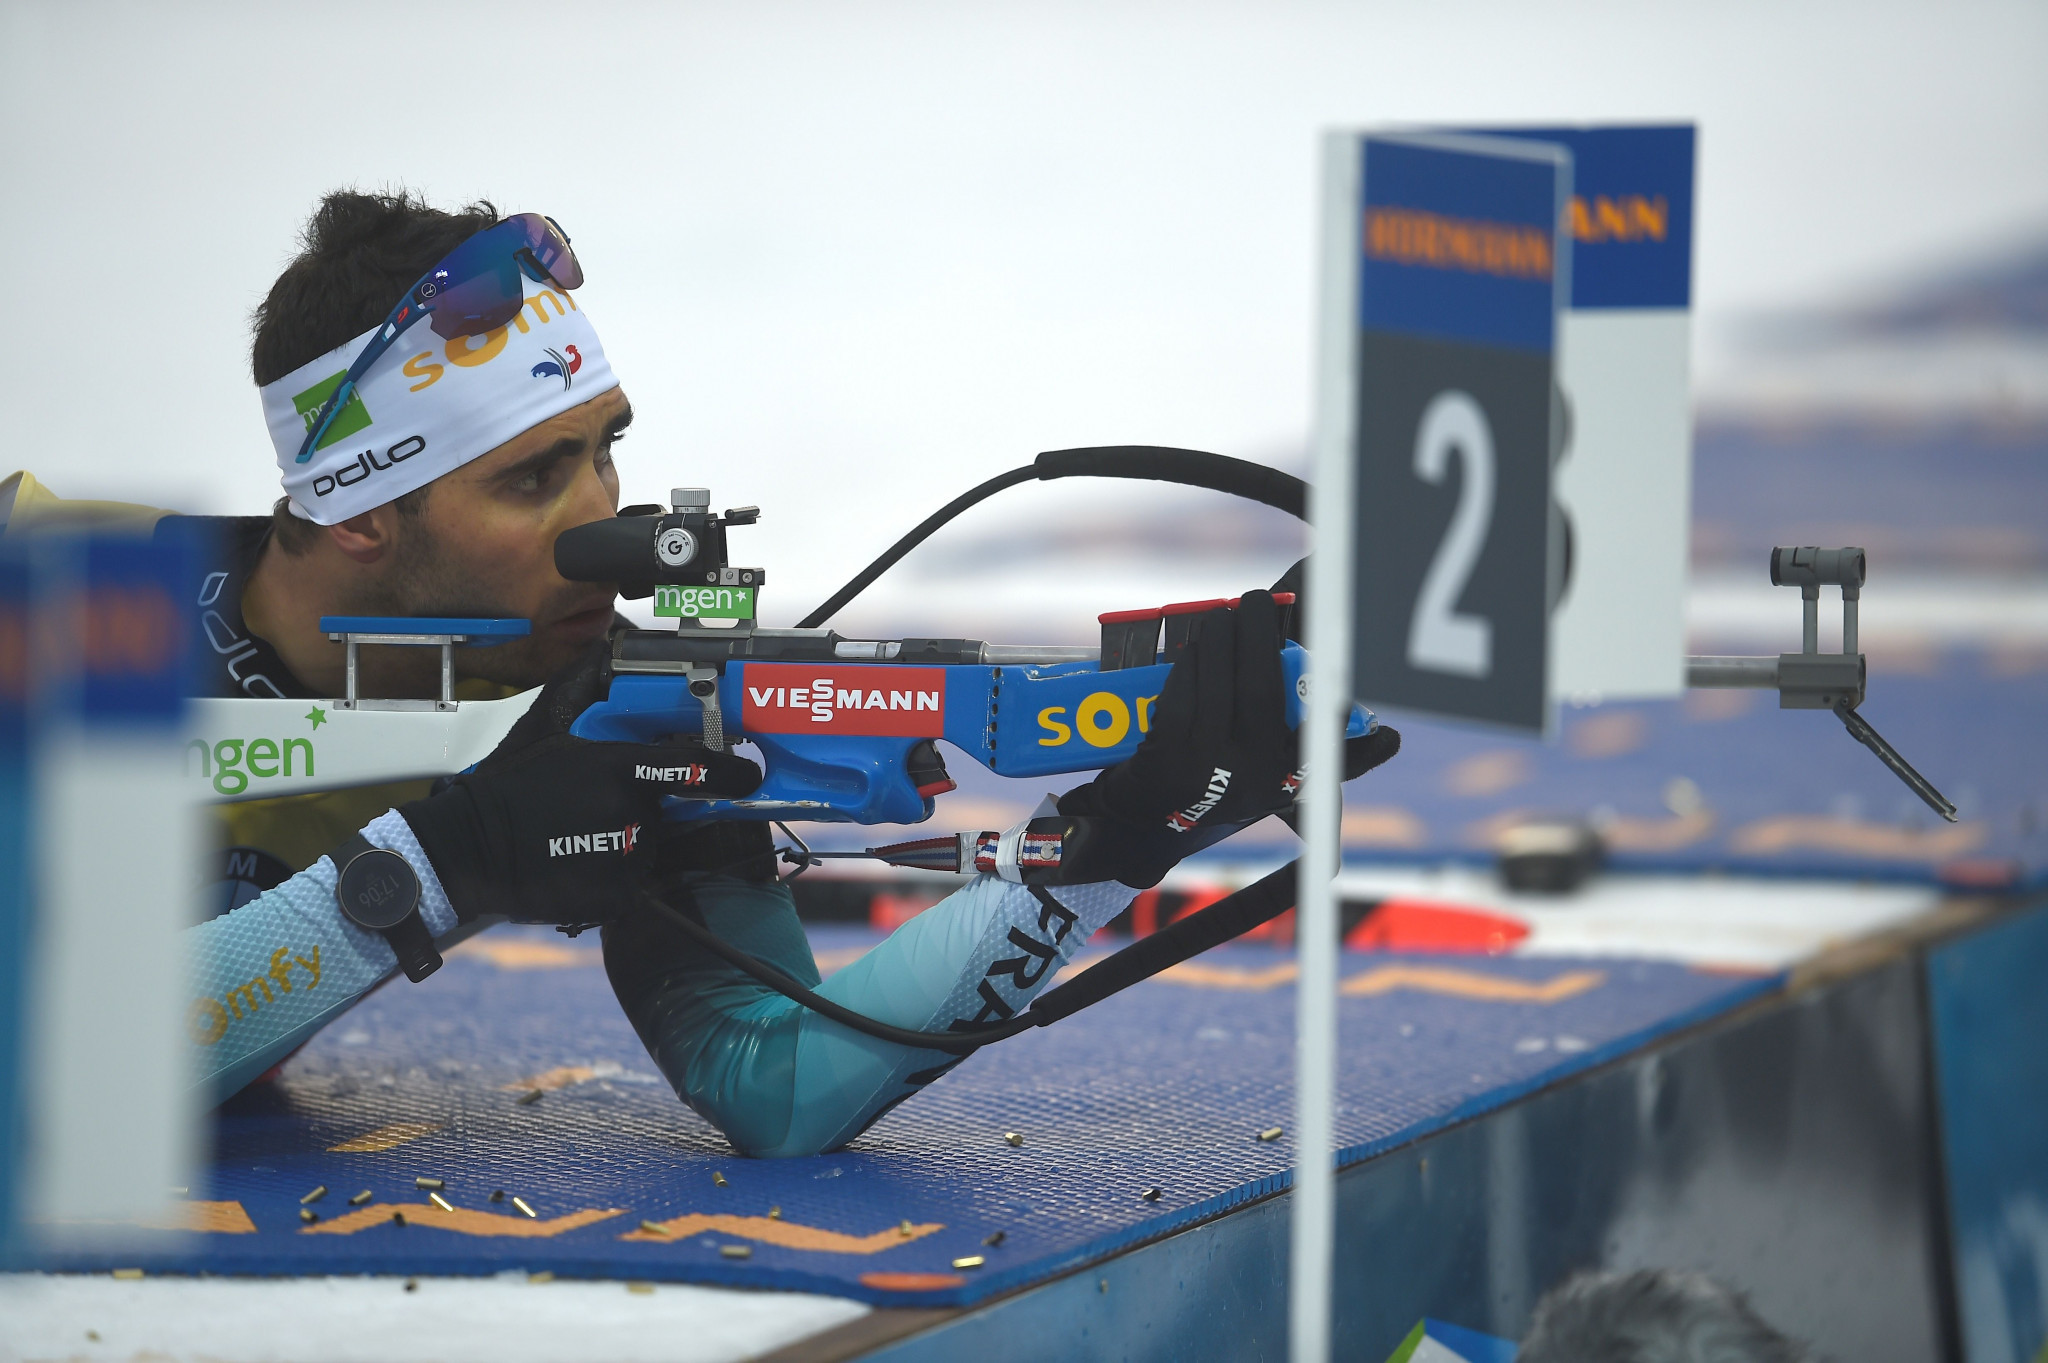 Martin Fourcade leads the overall men's Biathlon World Cup standings ©Getty Images